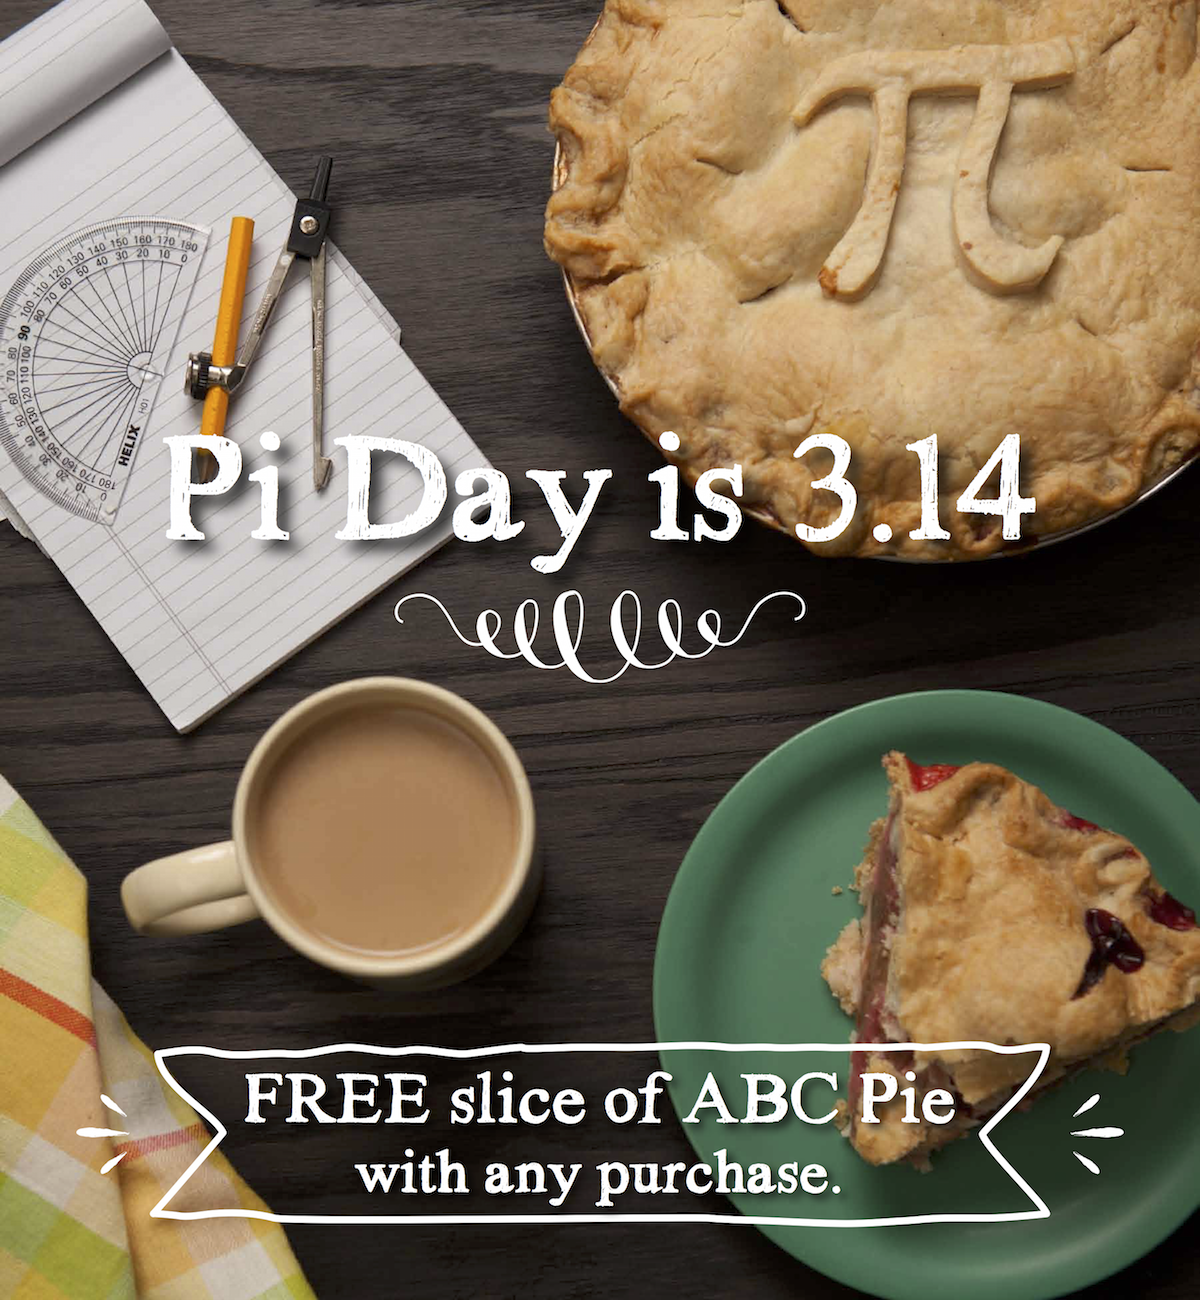 GT Pie Co Teams Up With Michigan Agriculture & Education to Celebrate